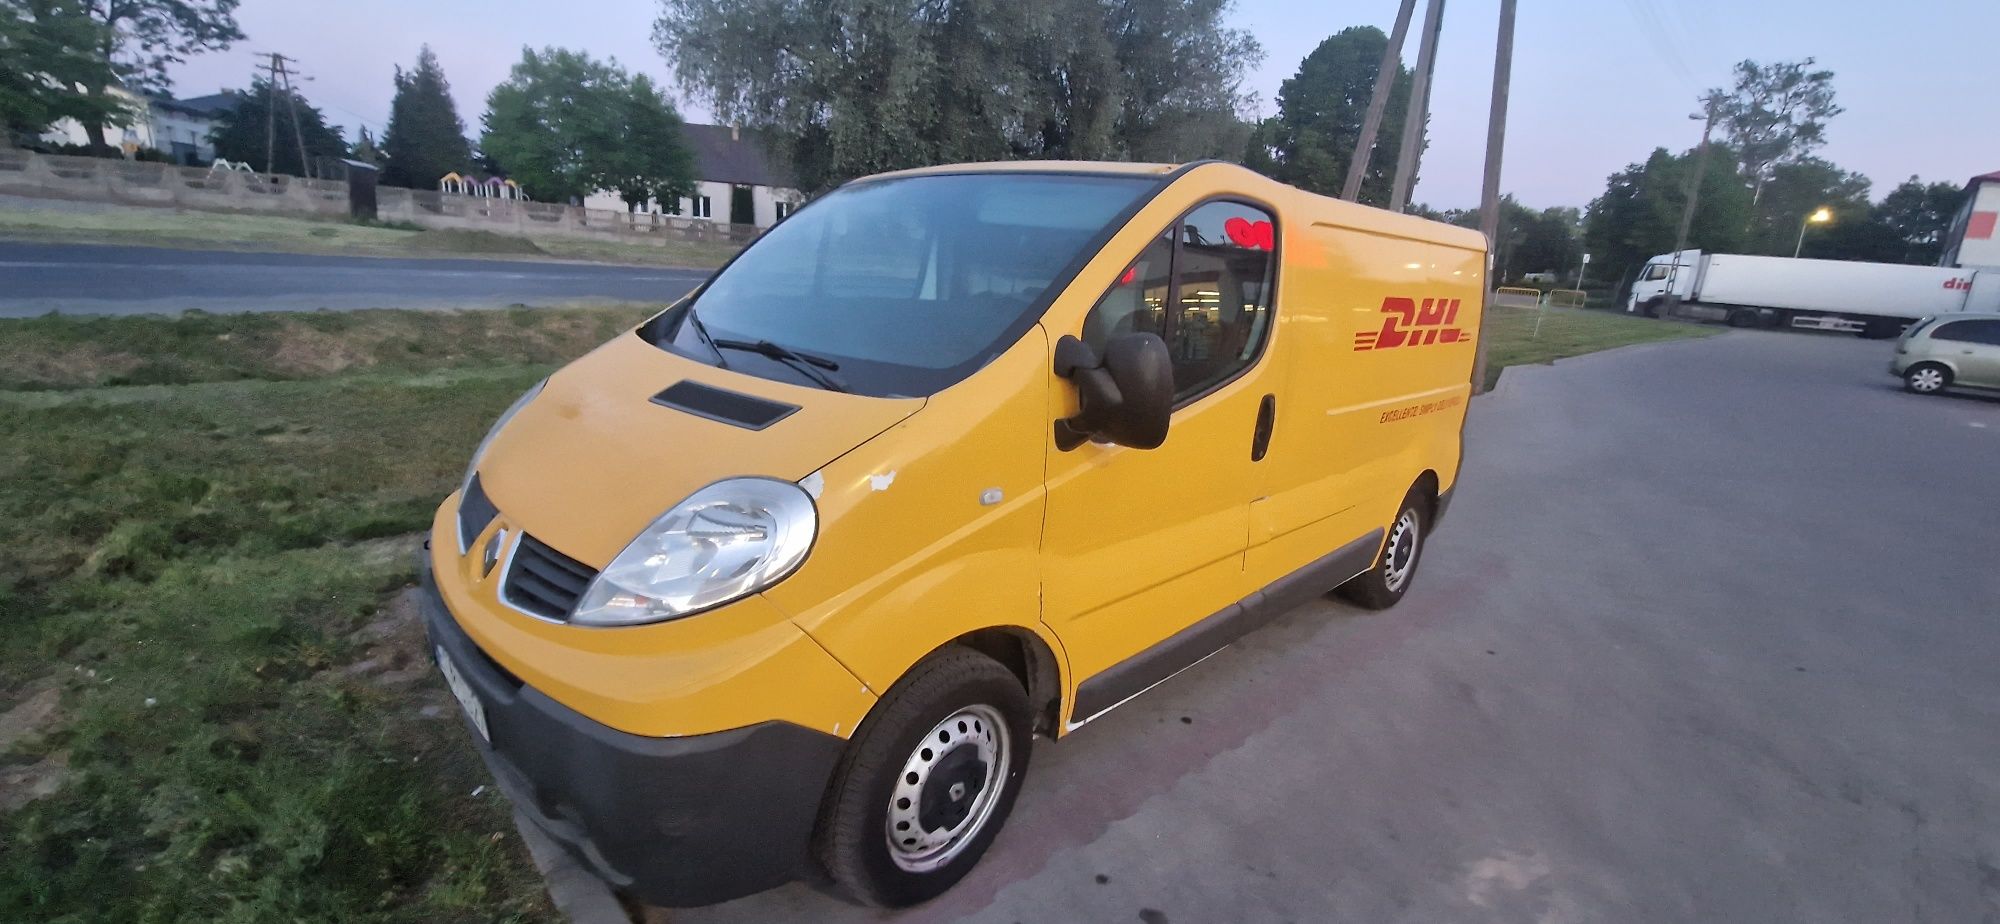 Renault trafic 2.0 dci ,2010 rok